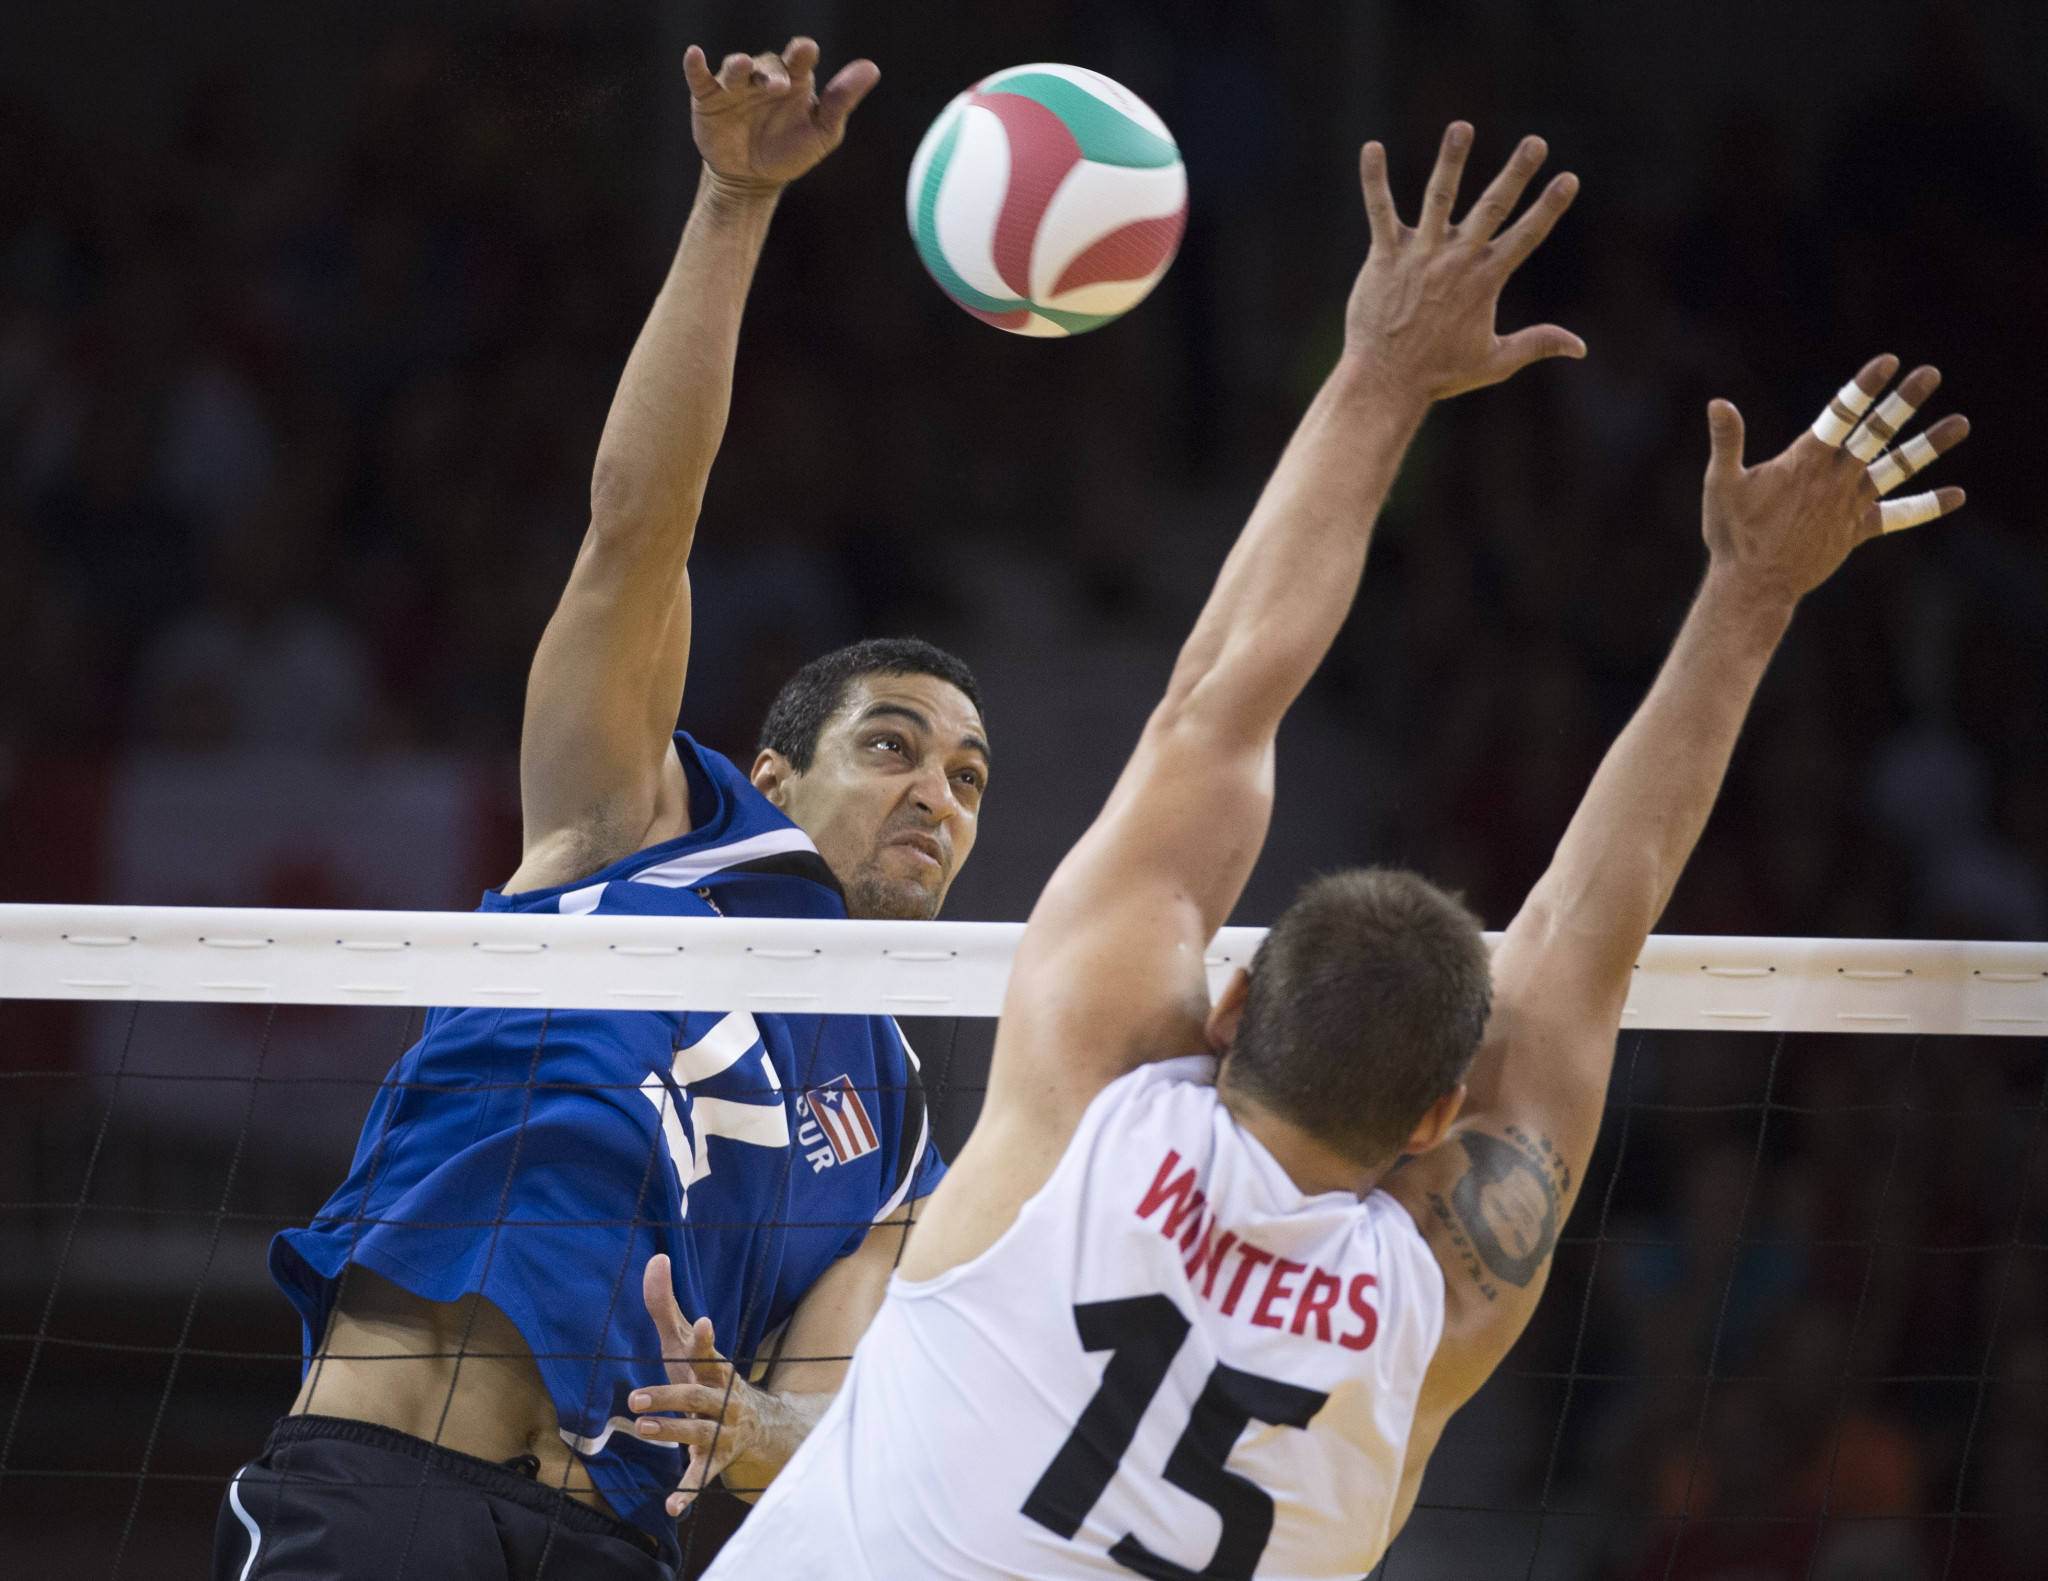 Puerto Rico earn first ever NORCECA Men's Continental Championship volleyball title